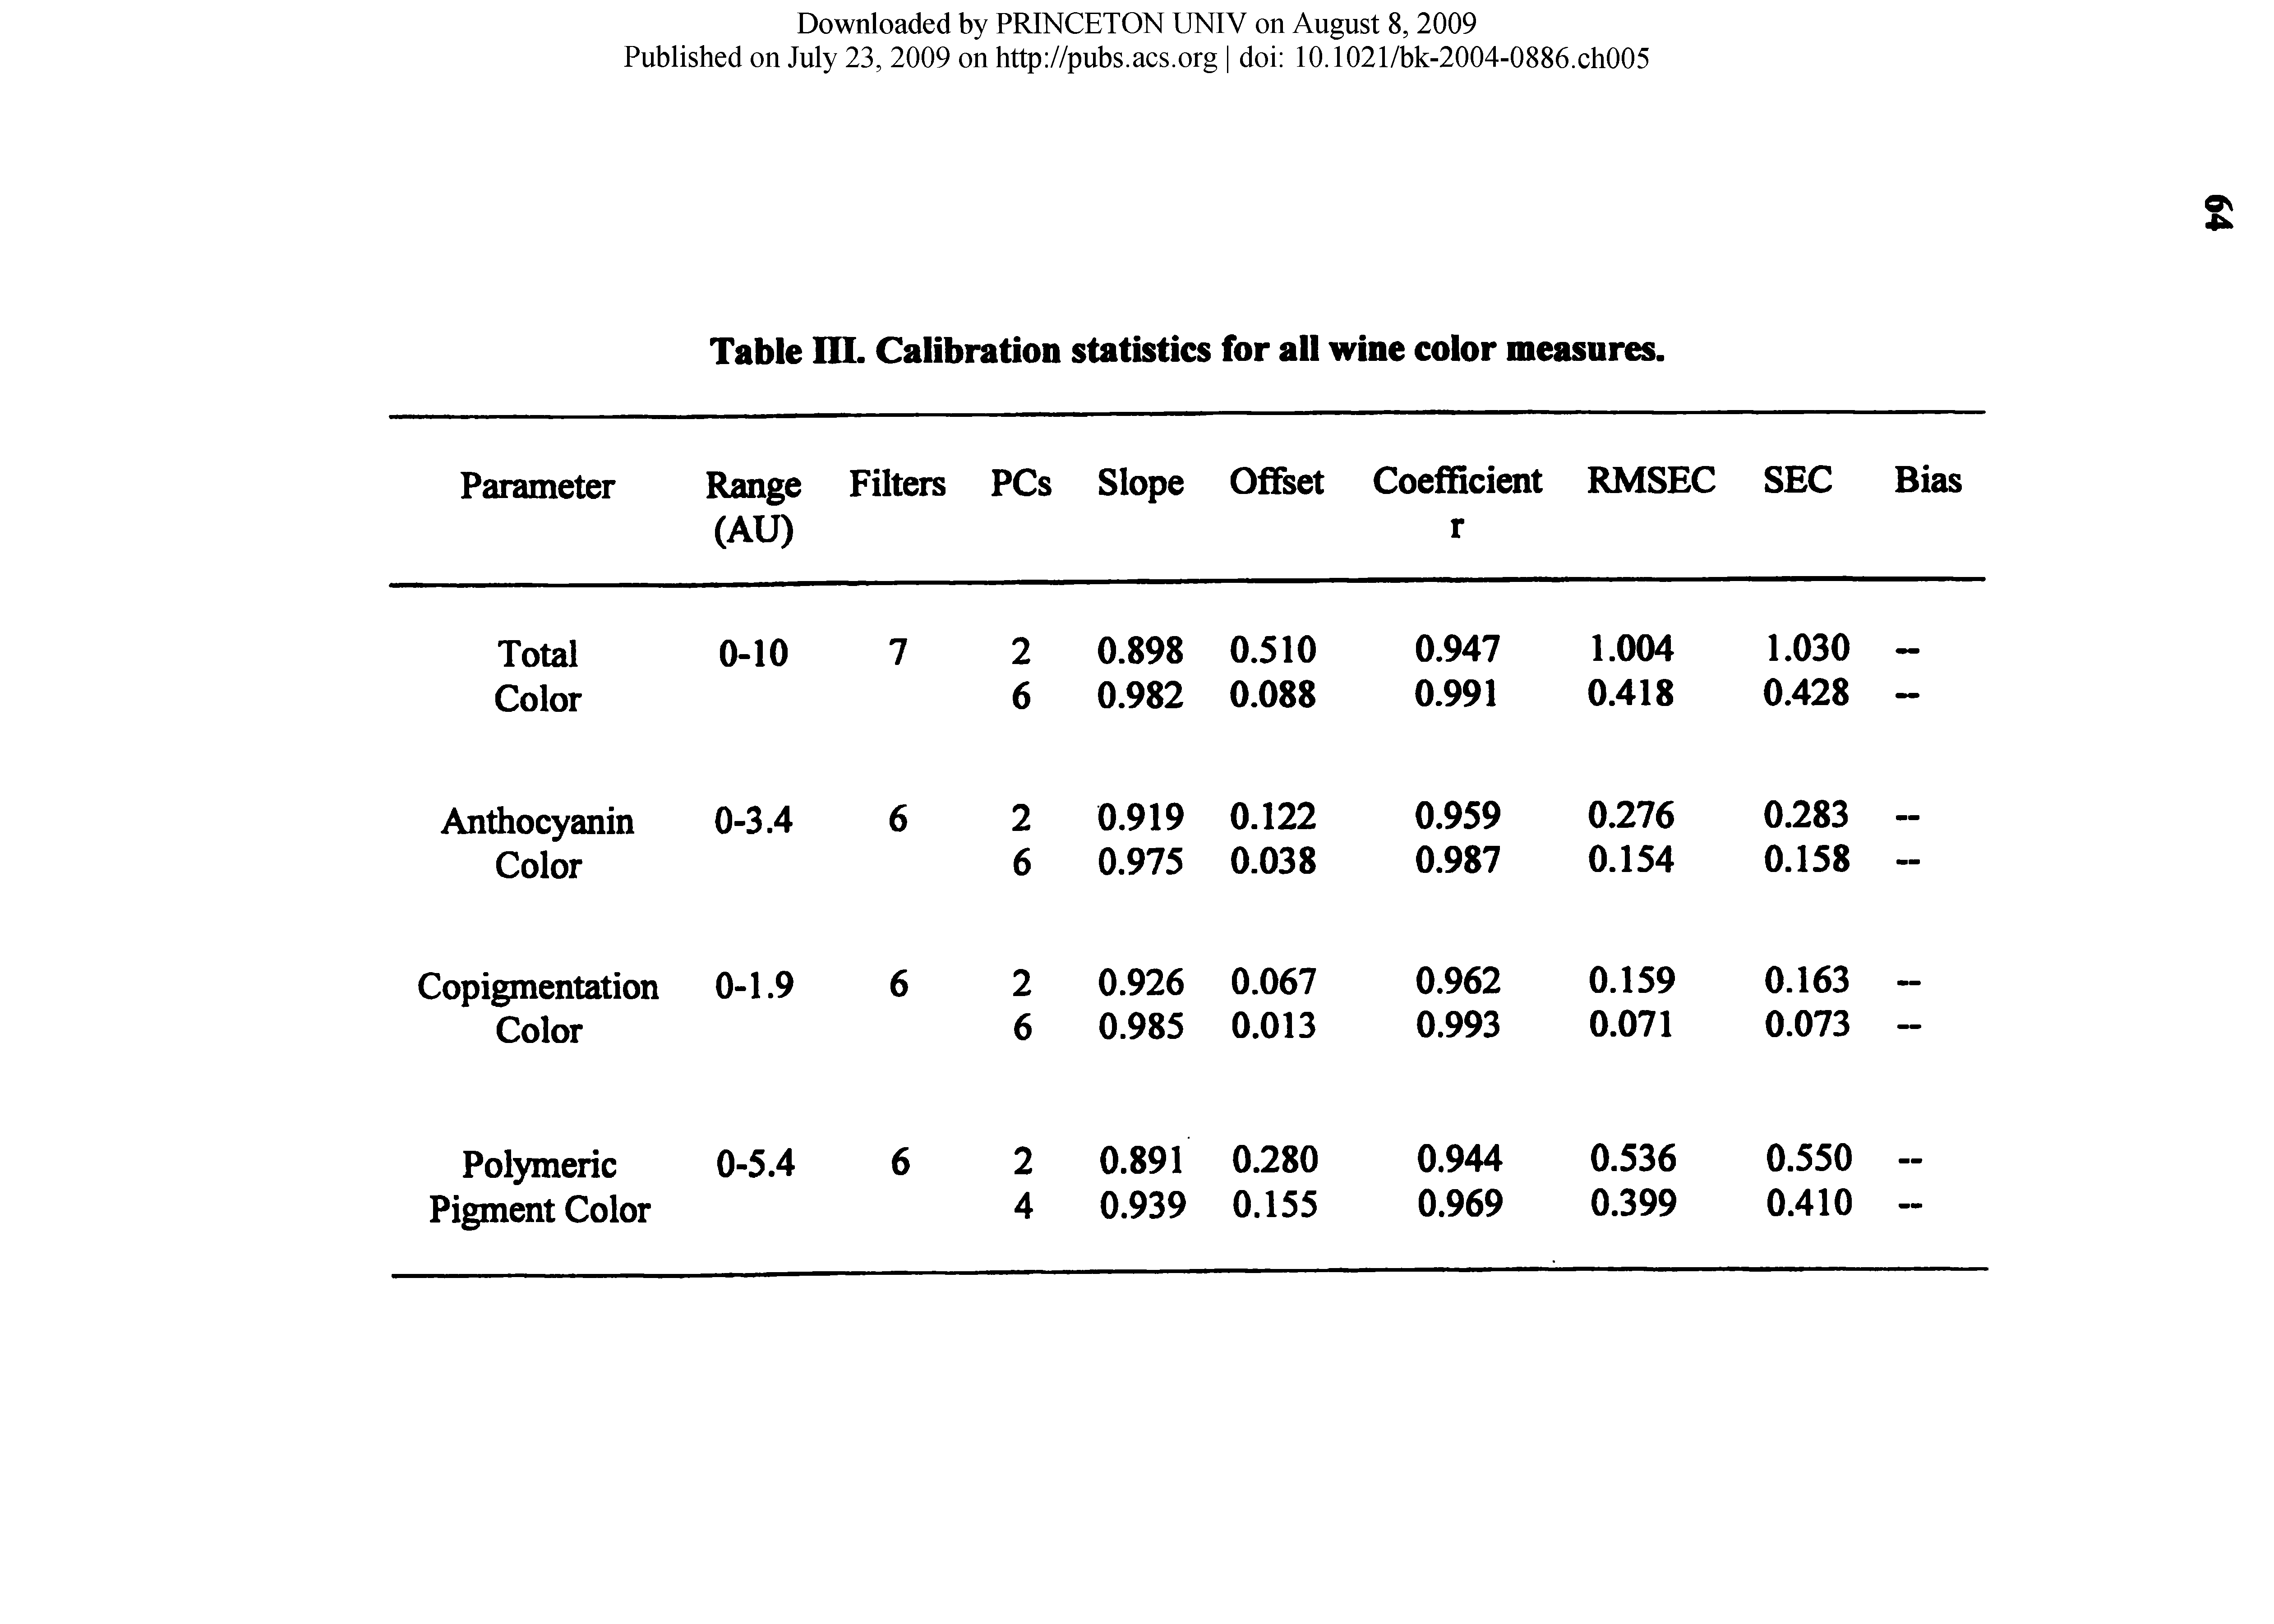 Table III. Calibration statistics for all wine color measures.